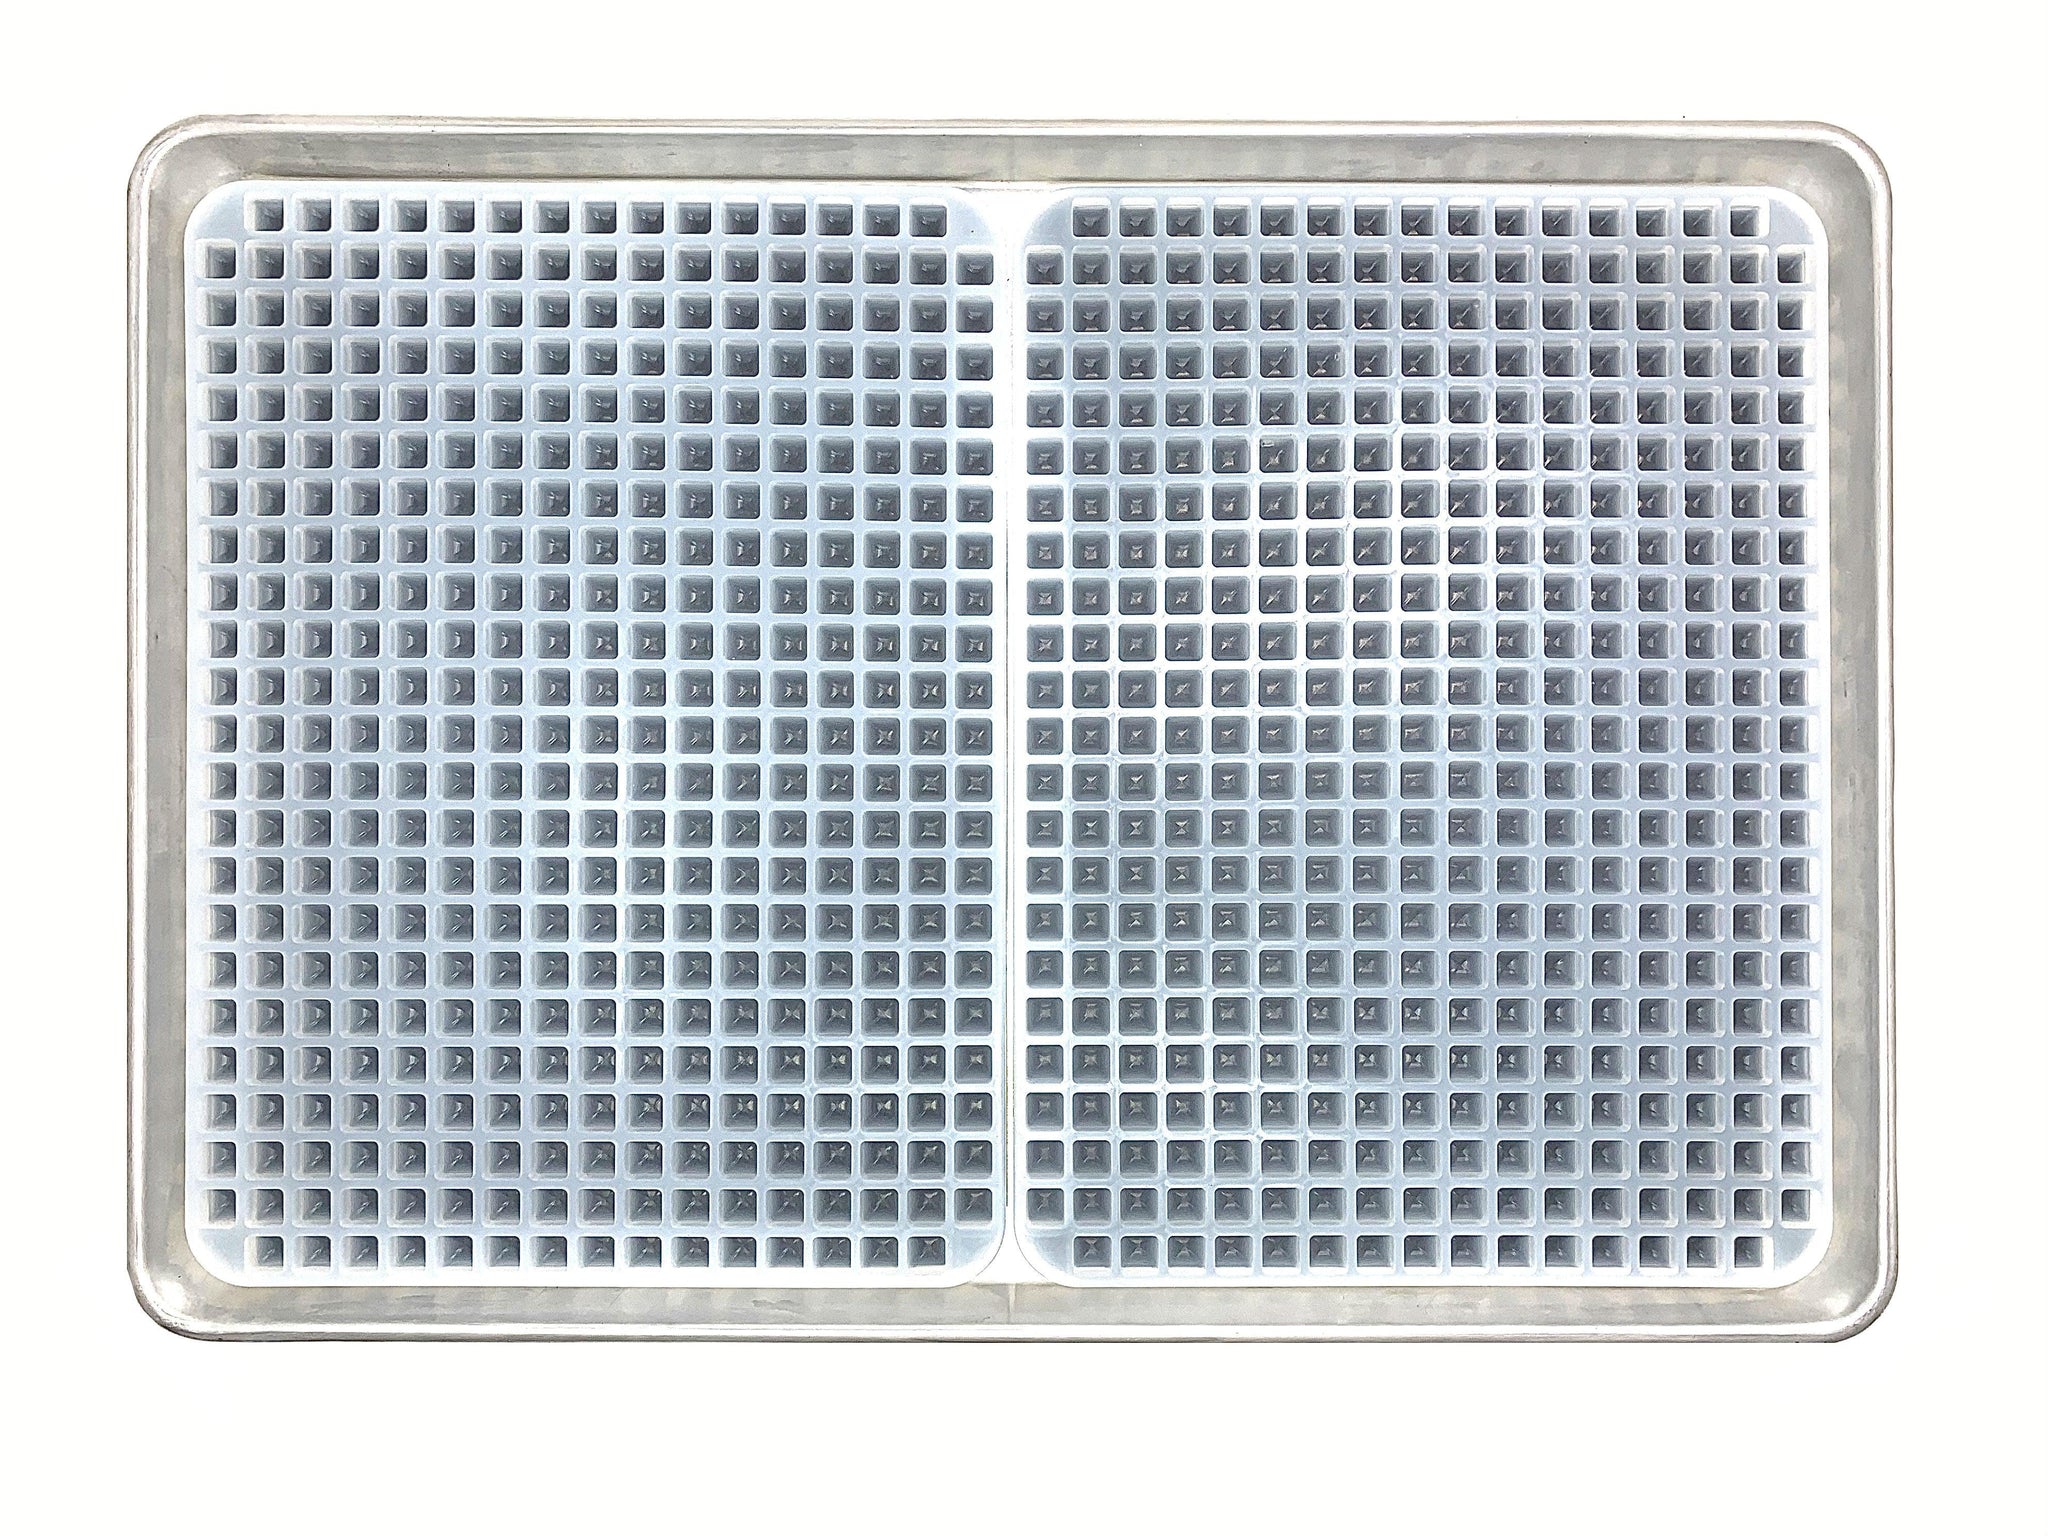 2 mL Square Mold - With Rounded Top - Half Sheet - 387 cavity